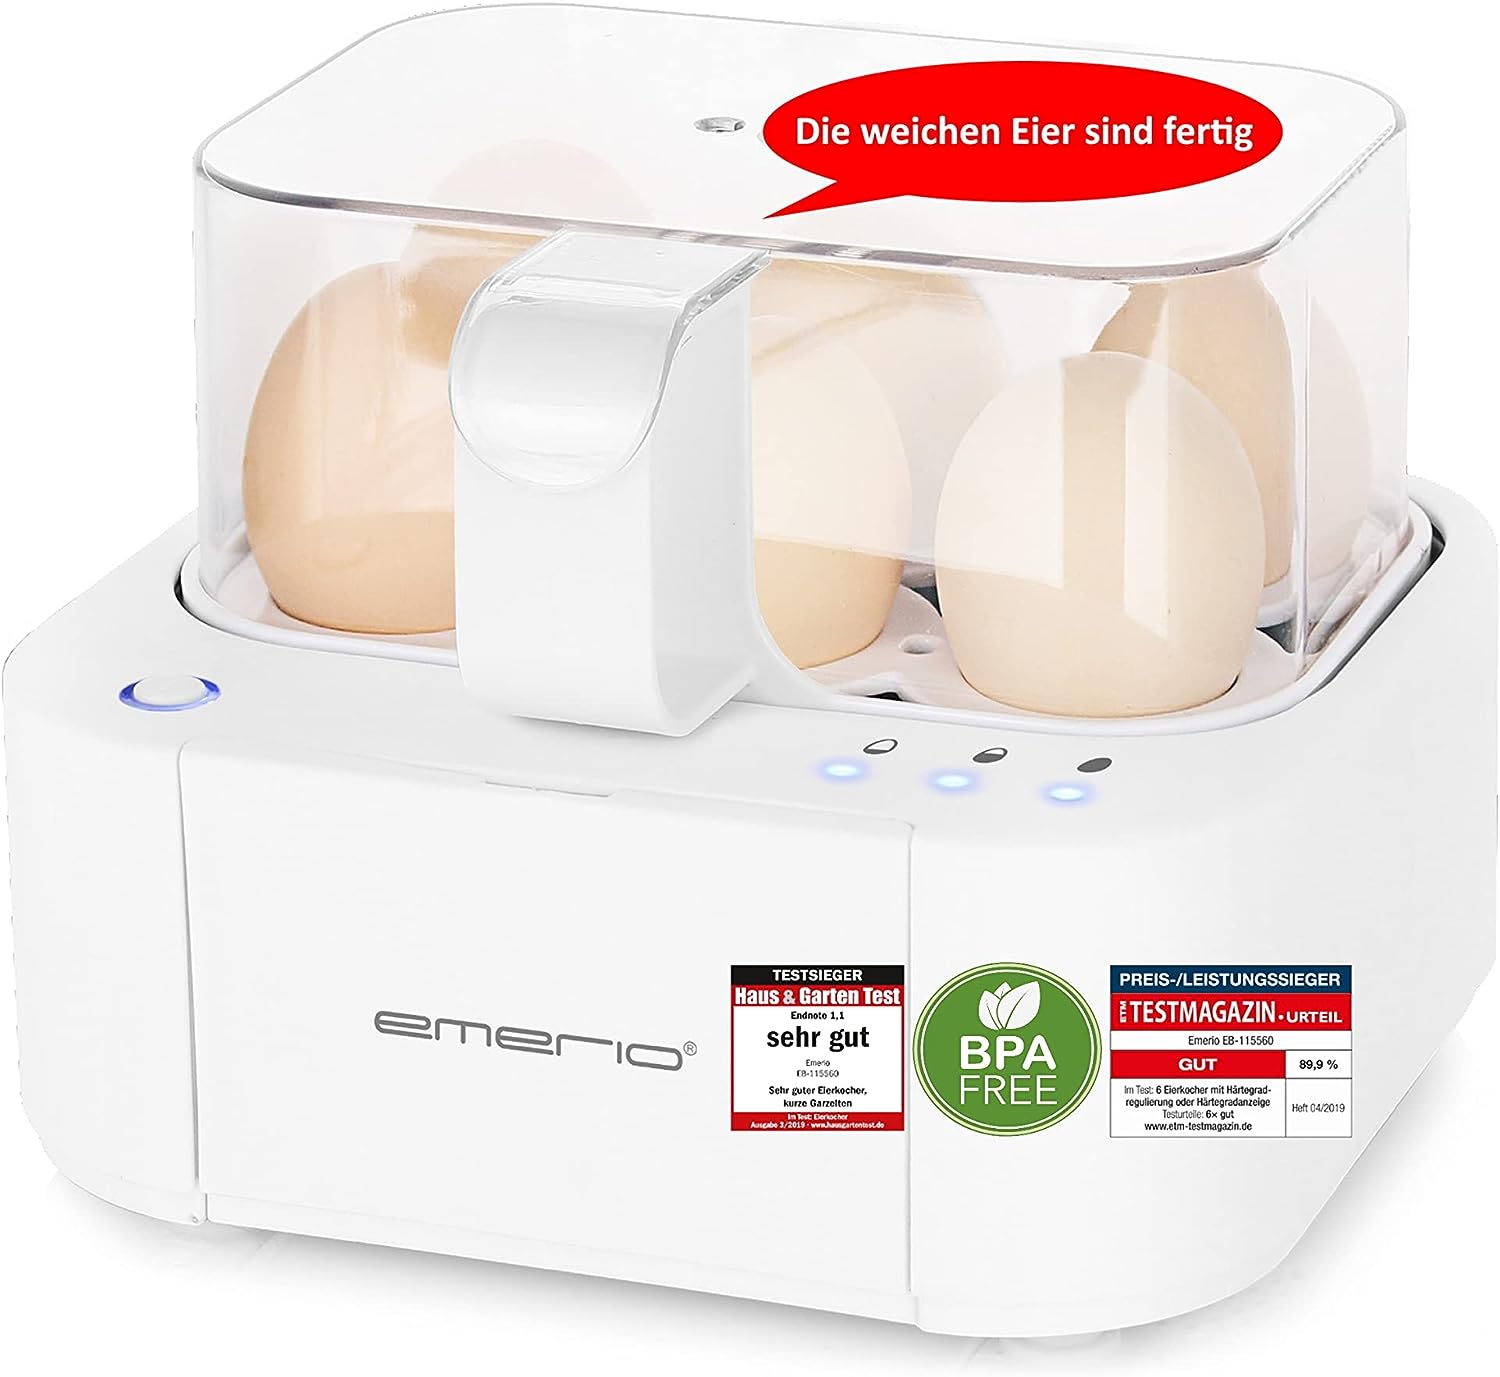 Emerio Best egg cooker EB-115560 boils all three cooking levels [soft|medium|hard] in just one cooking process with perfect results and voice output, unique in technology and design, model 2022